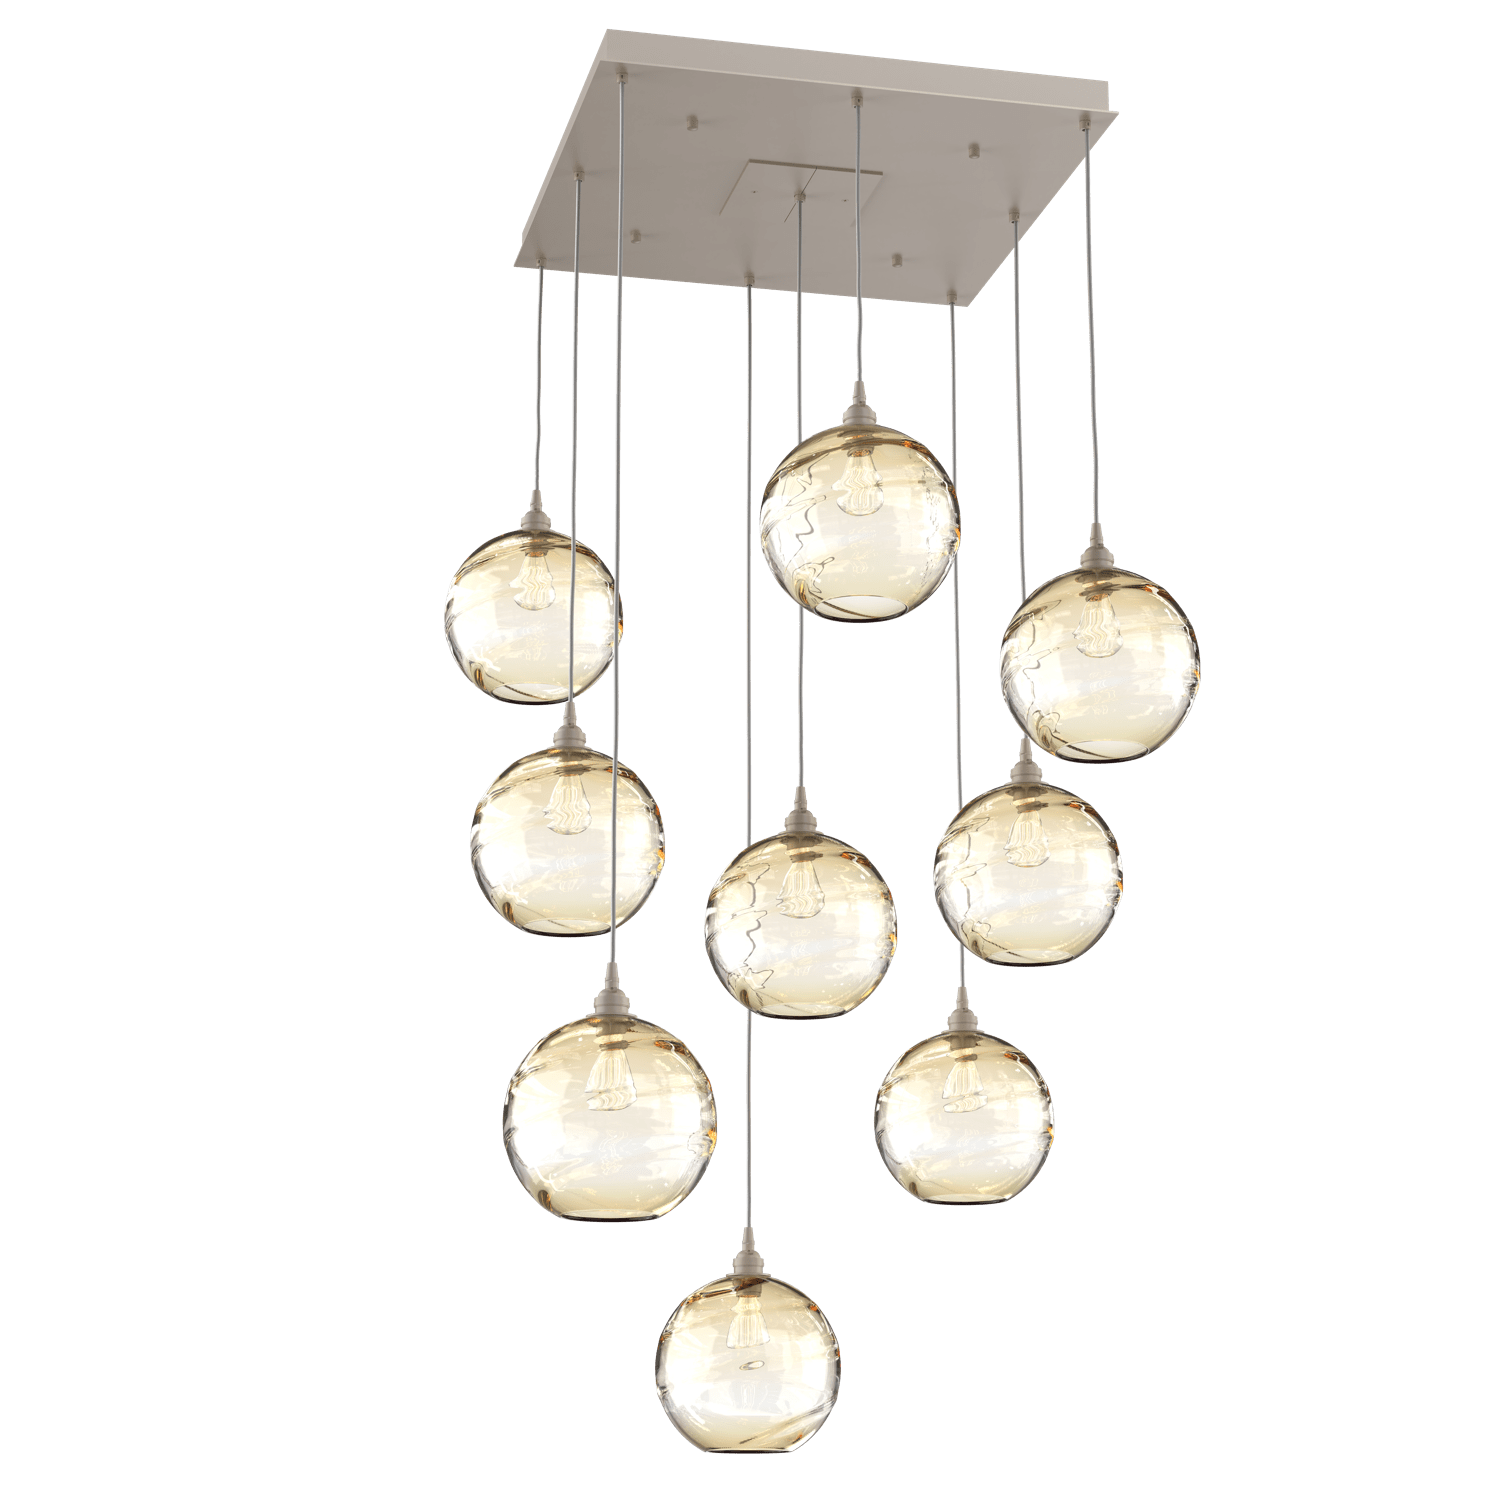 CHB0047-09-BS-OA-Hammerton-Studio-Optic-Blown-Glass-Terra-9-light-square-pendant-chandelier-with-metallic-beige-silver-finish-and-optic-amber-blown-glass-shades-and-incandescent-lamping